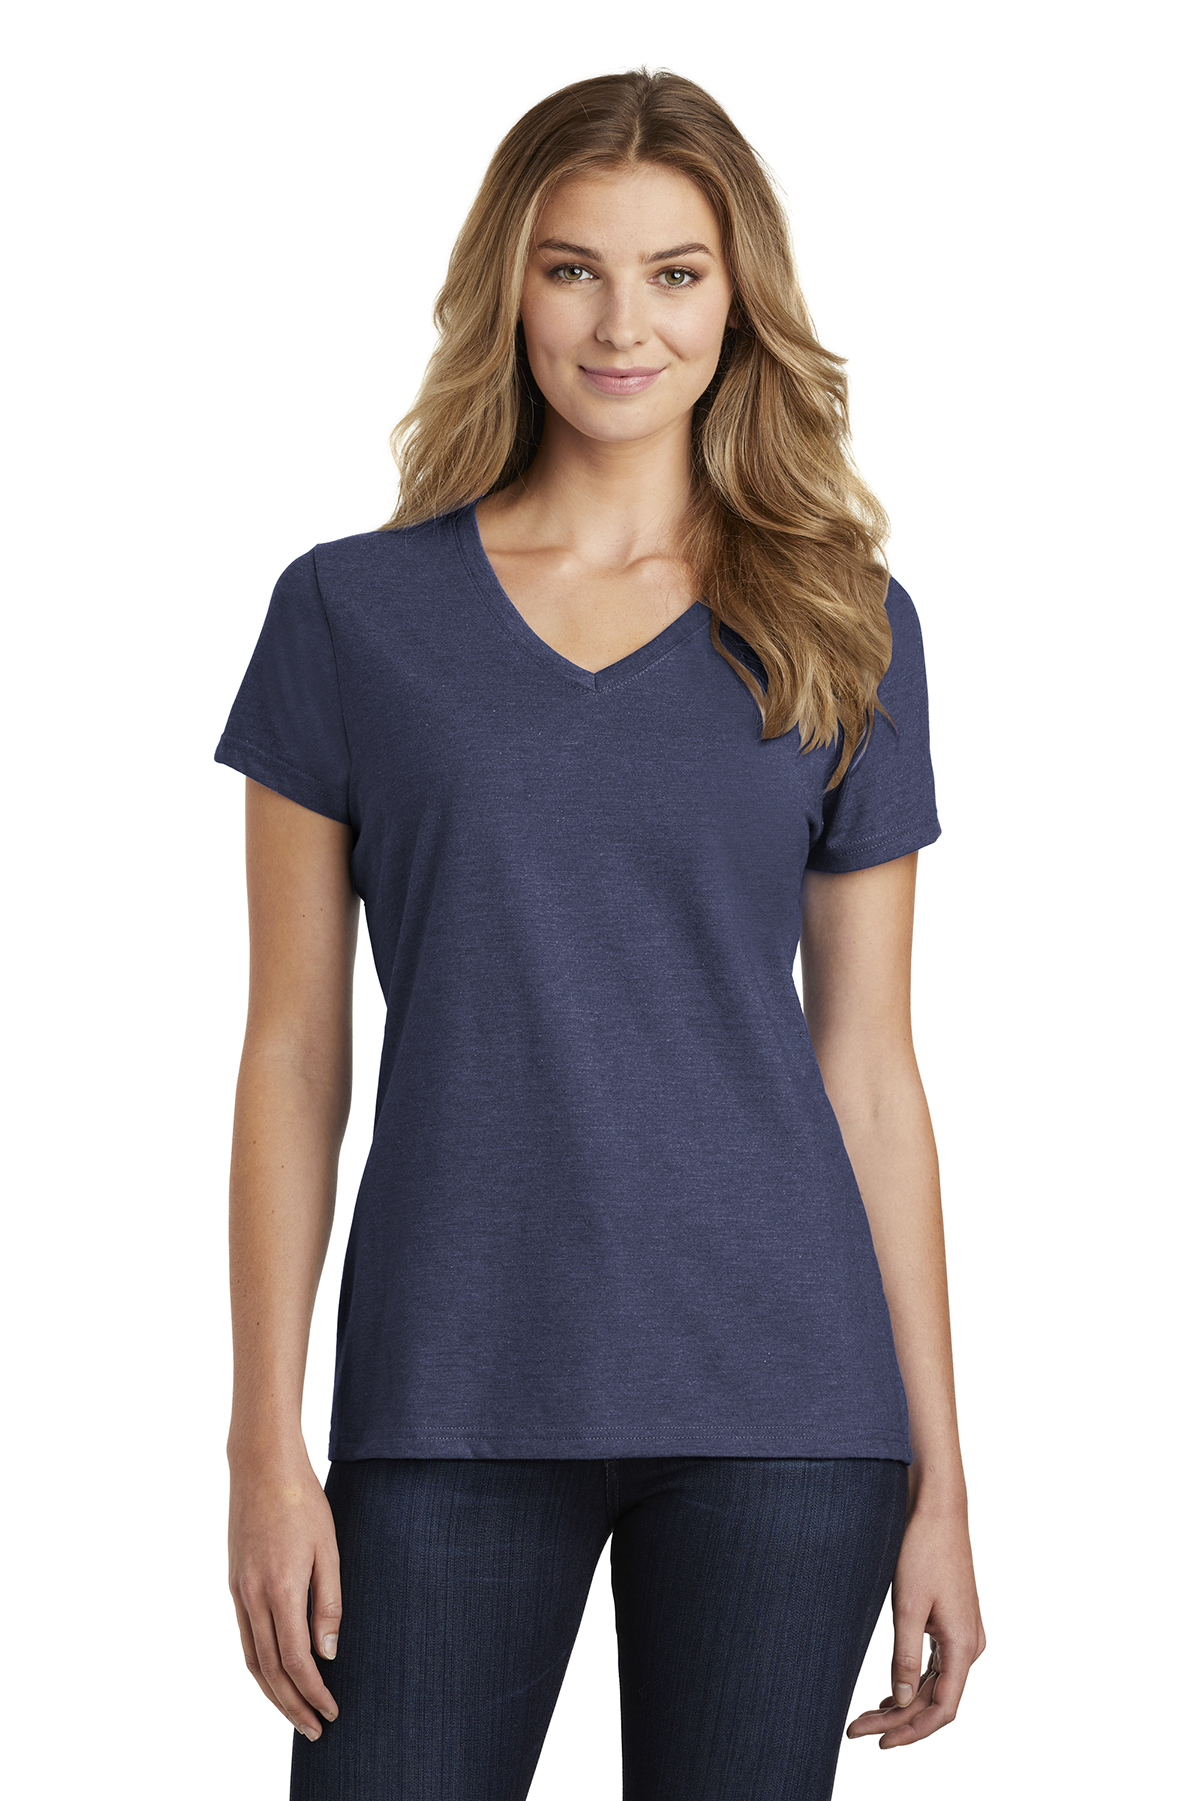 click to view Team Navy Heather